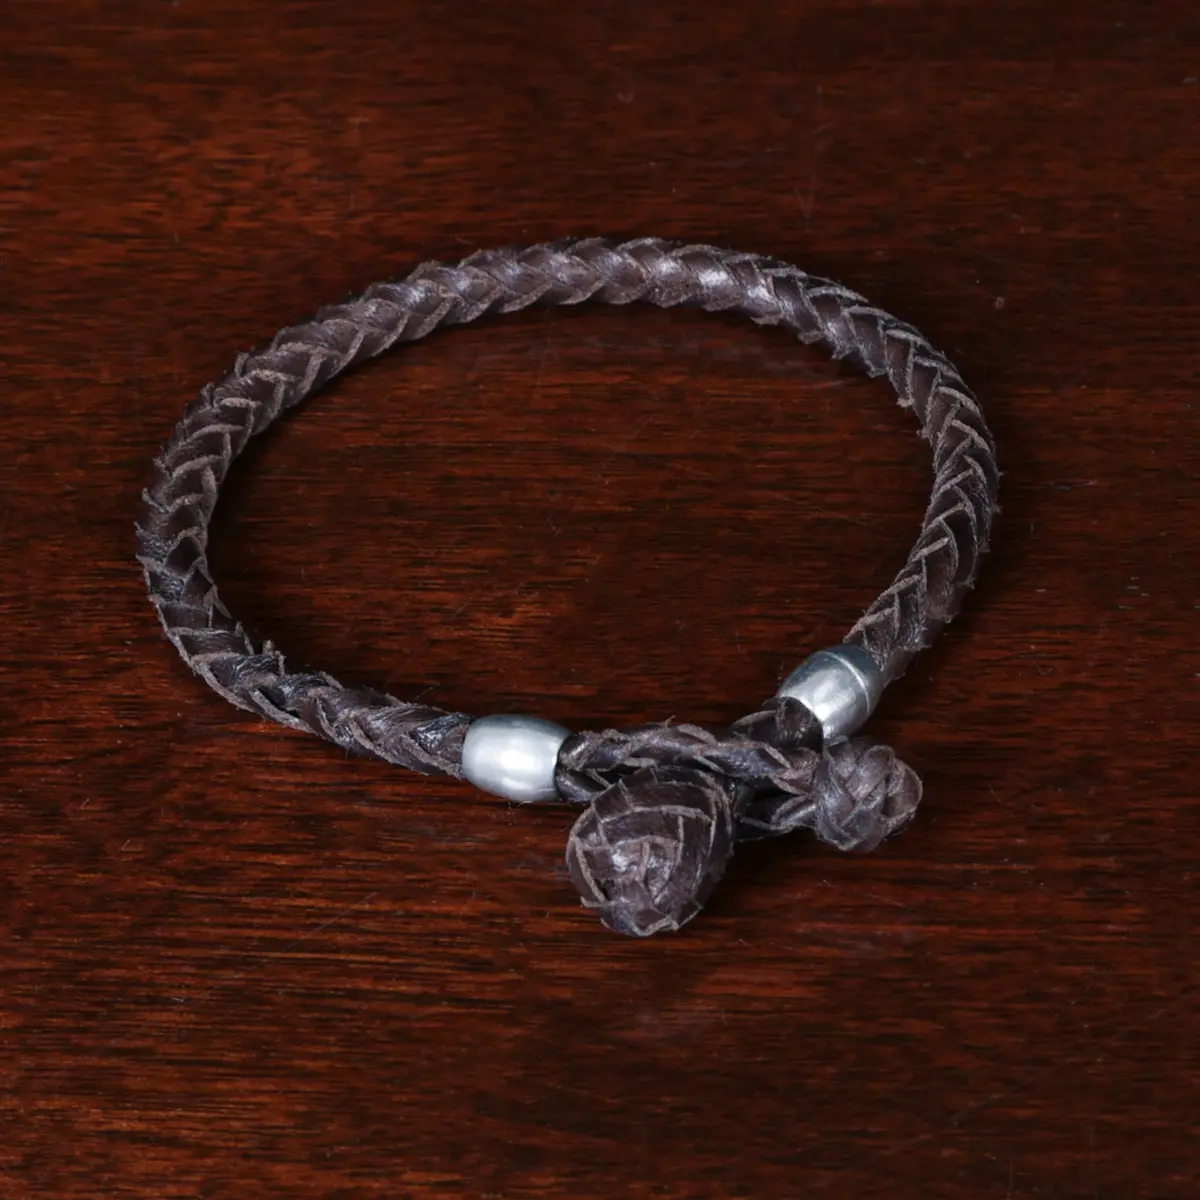 braided brown leather bracelet with pewter beads and loop closure